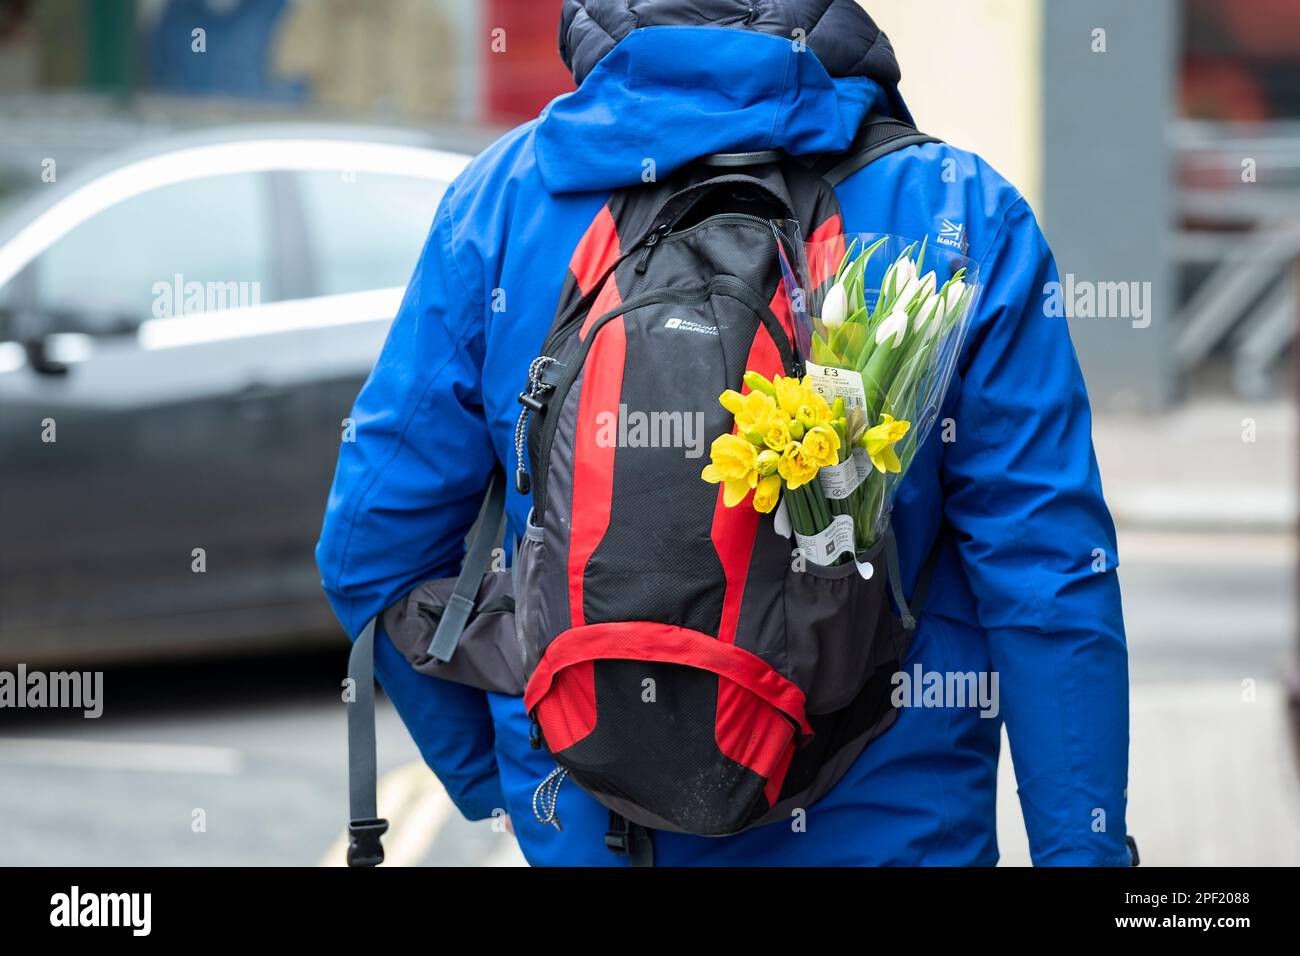 A man walking on a street with three recently purchased supermarket bouquets of flowers stowed onto the back of a rucksack he is carrying. Devon, UK Stock Photo